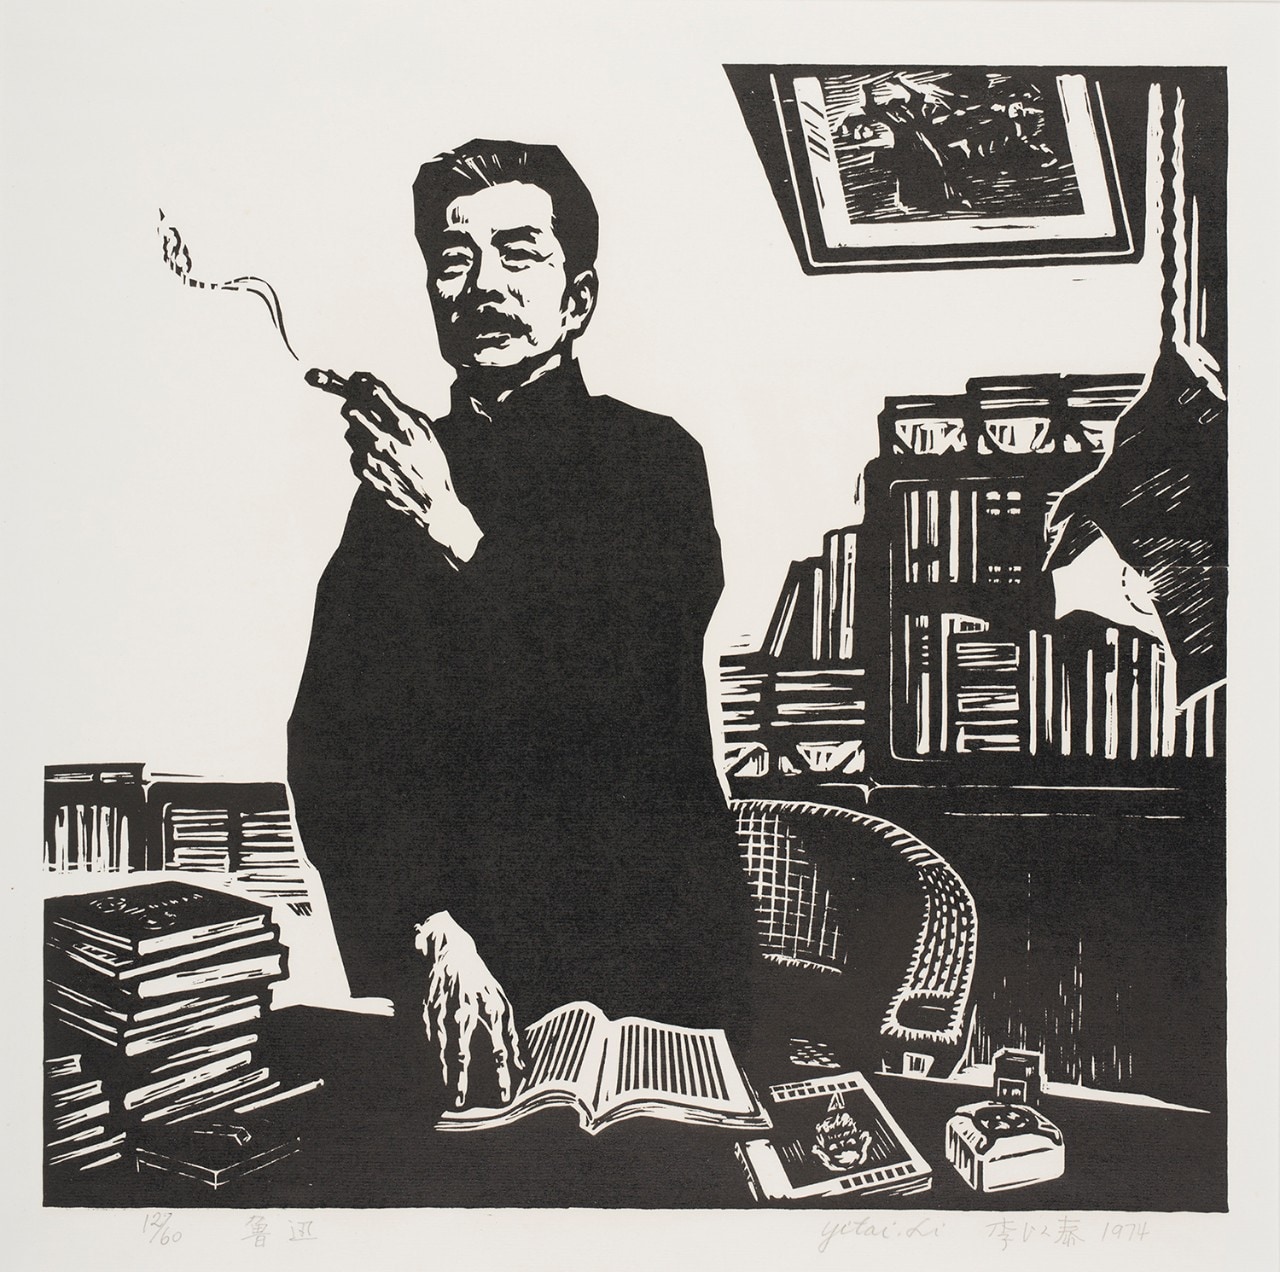 A black and white woodcut on paper print, a portrait of Lu Xun